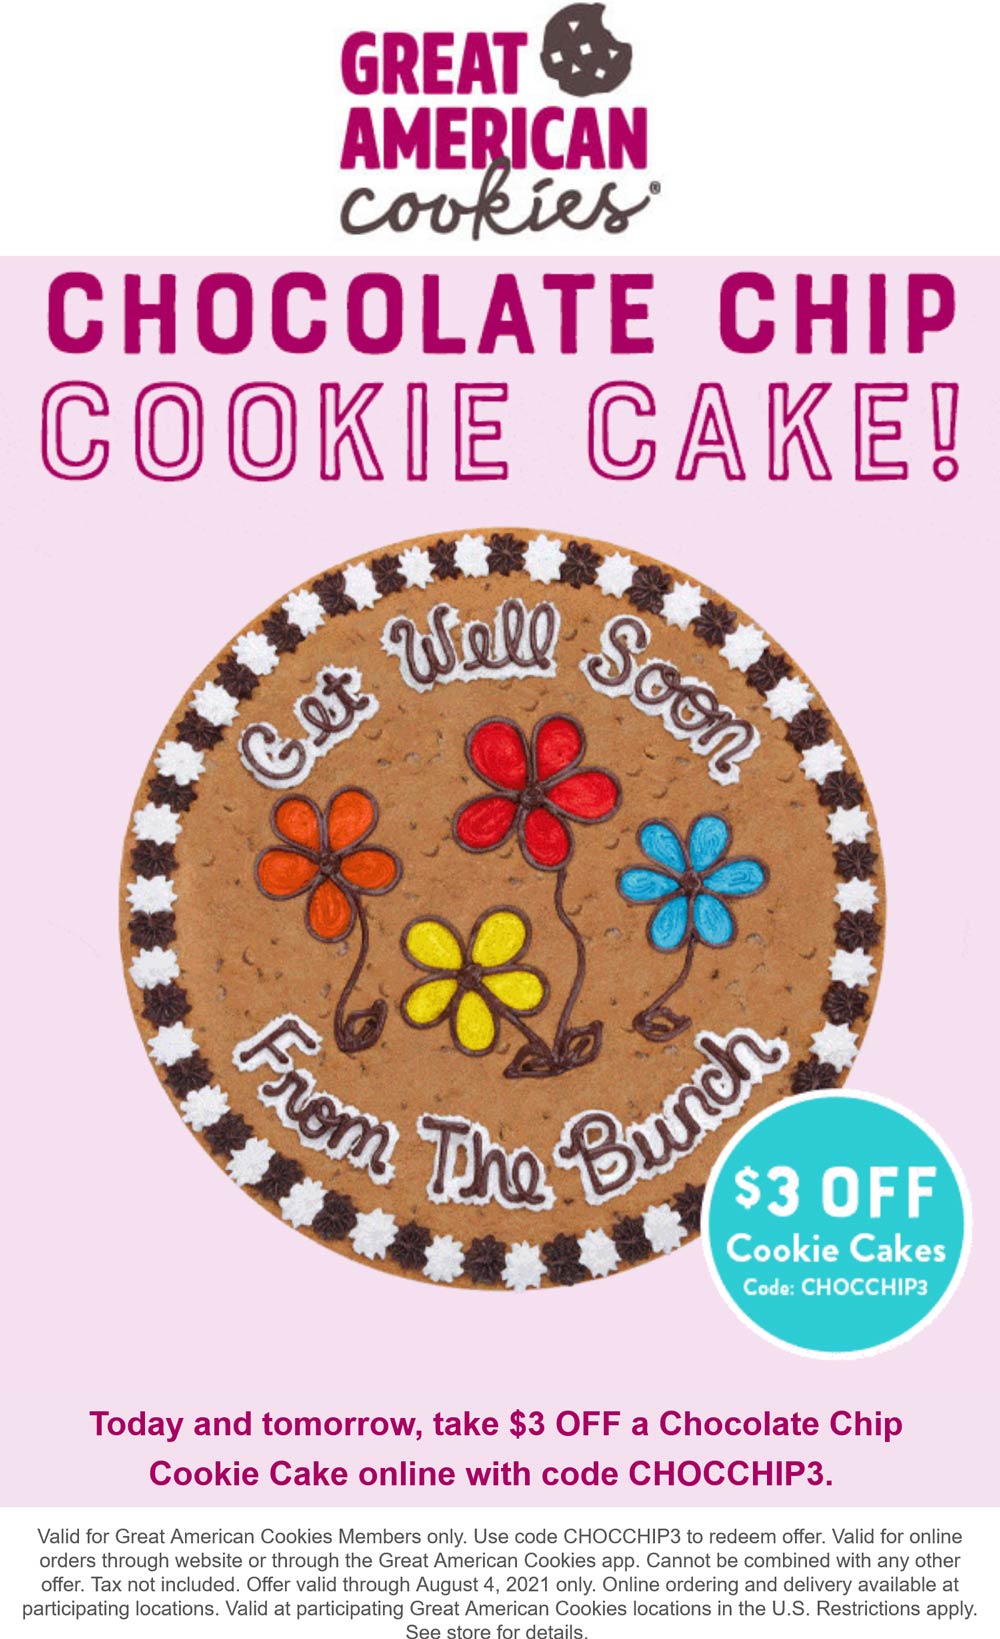 [May, 2022] 3 off cookie cakes today at Great American Cookies via